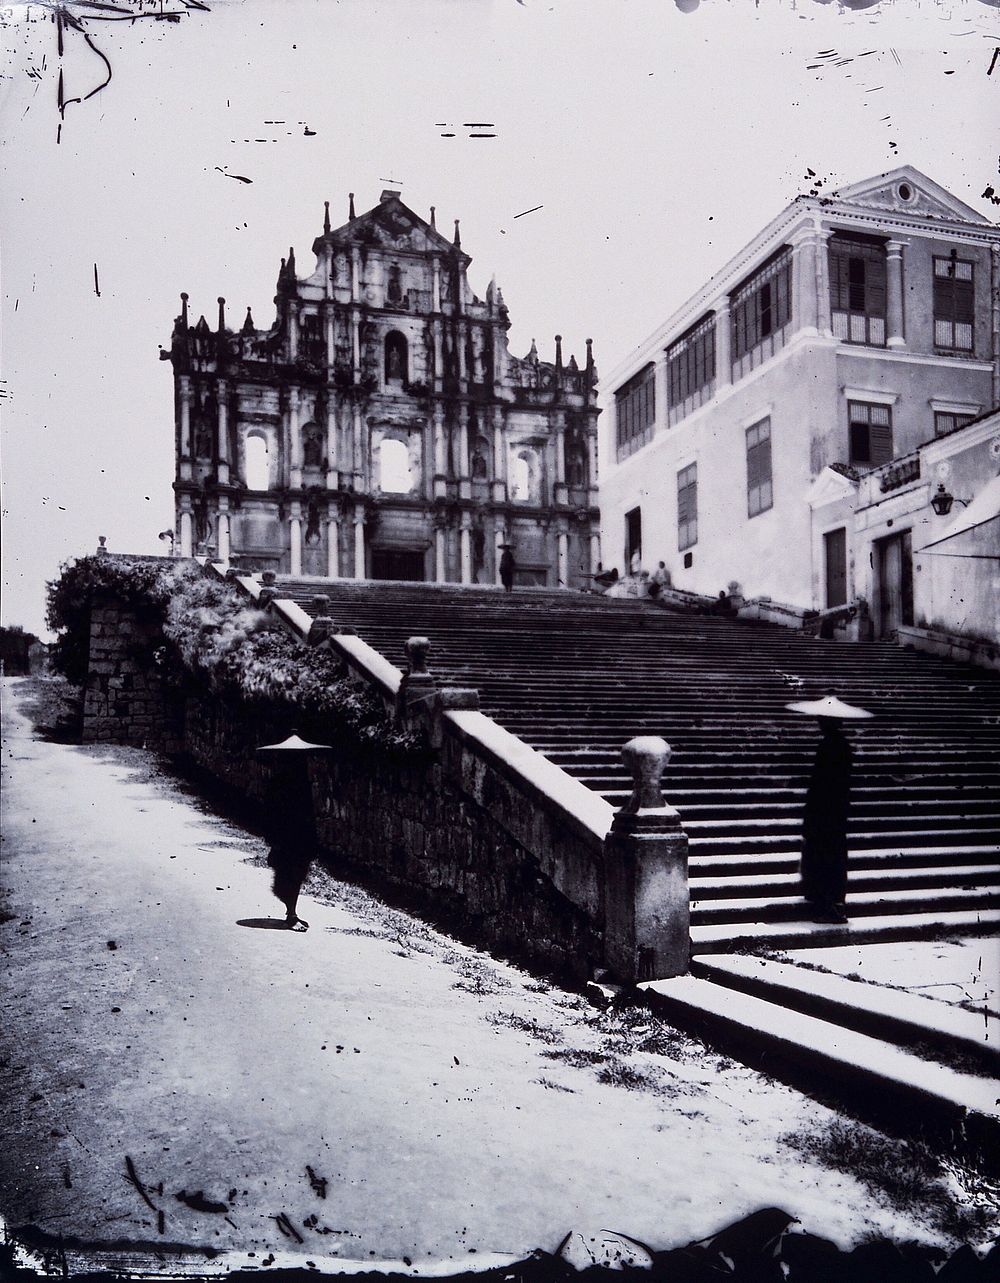 Macao, Kwangtung province, China. Photograph, 1981, from a negative by John Thomson, 1870.